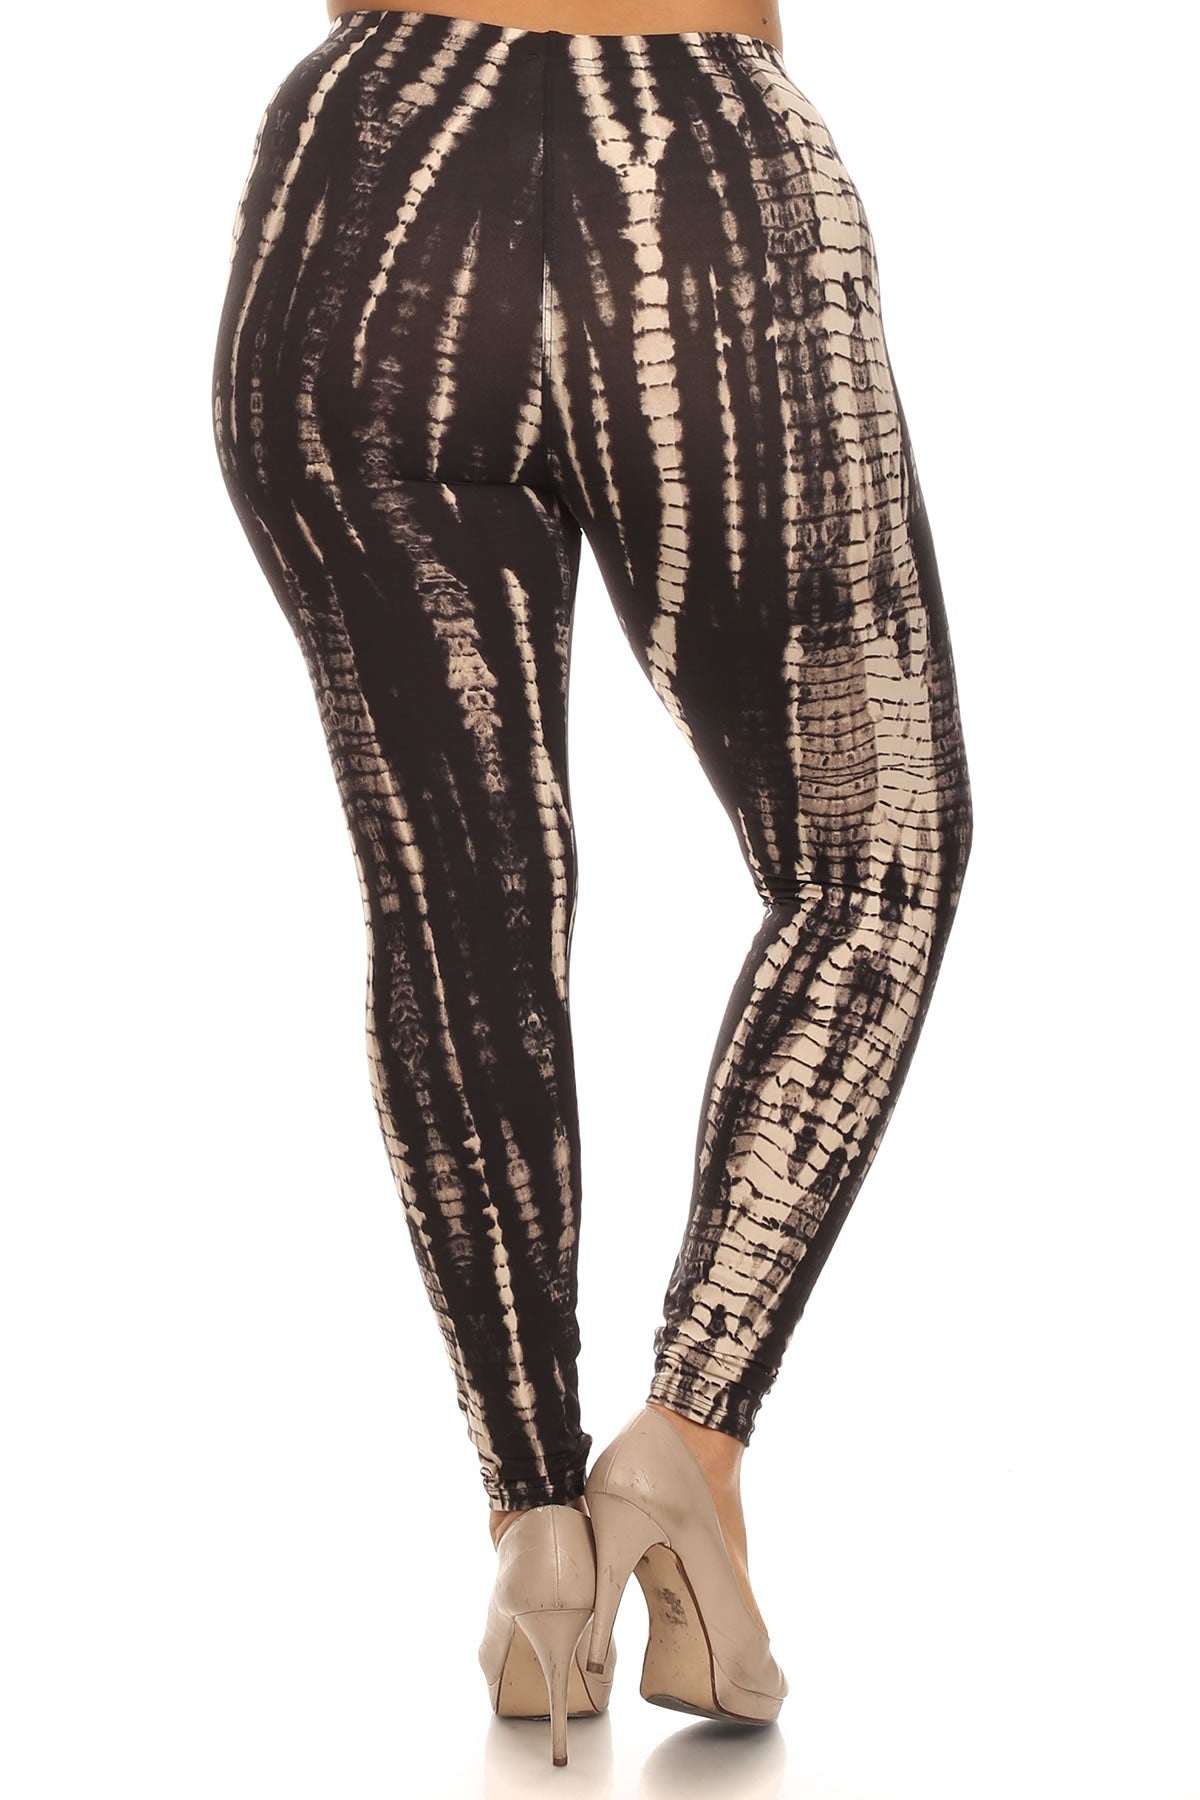 Plus Size Black And Tan Tie Dye Print Full Length Fitted Leggings With High Waist. - LOLA LUXE